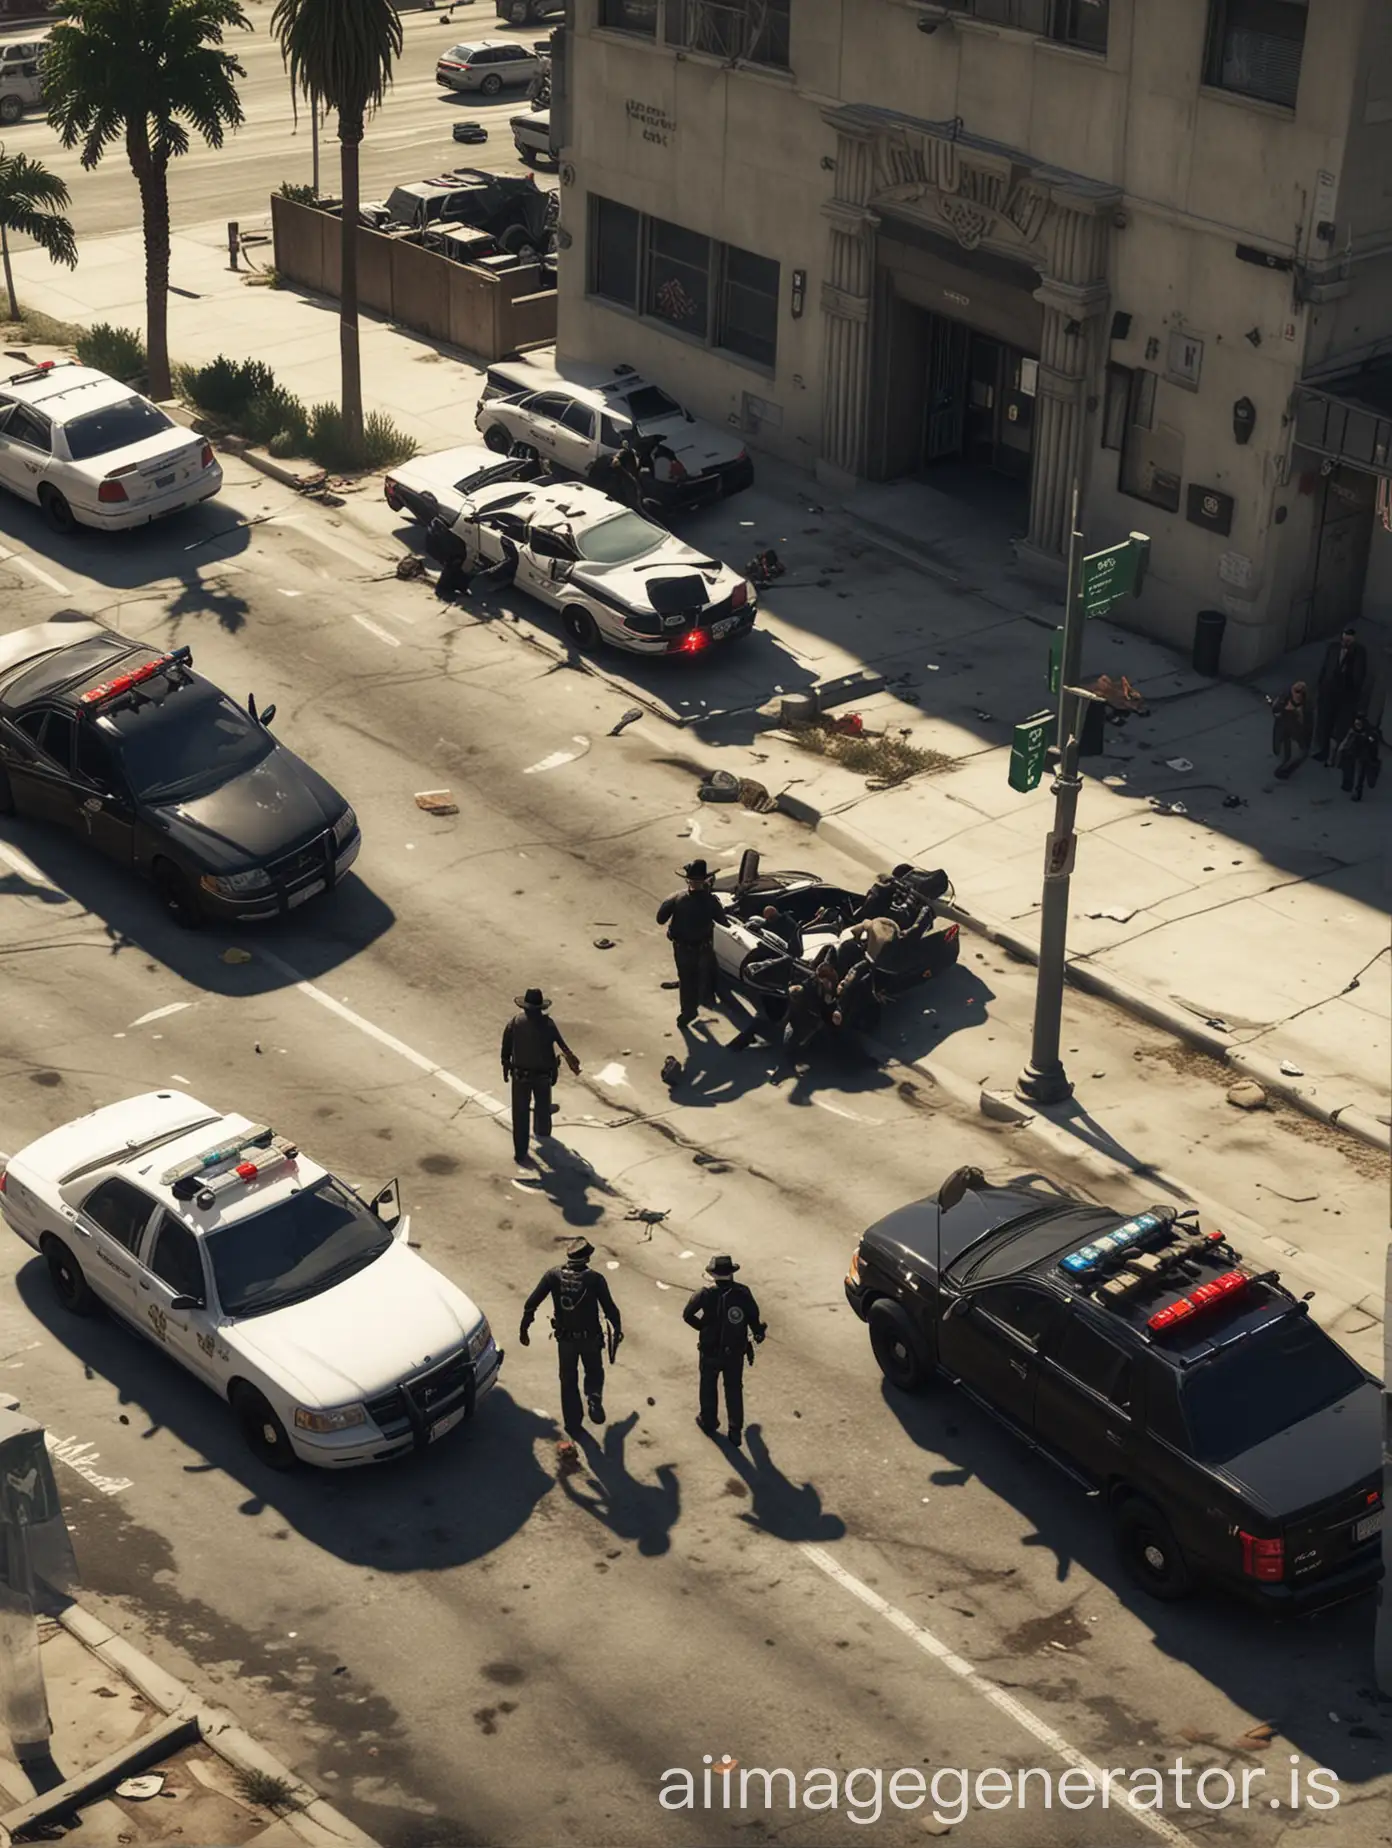 Image of a sheriff in black negotiating with robbers in a central Los Angeles bank heist GTA V style, with patrol cars around and hostages next to the robbers